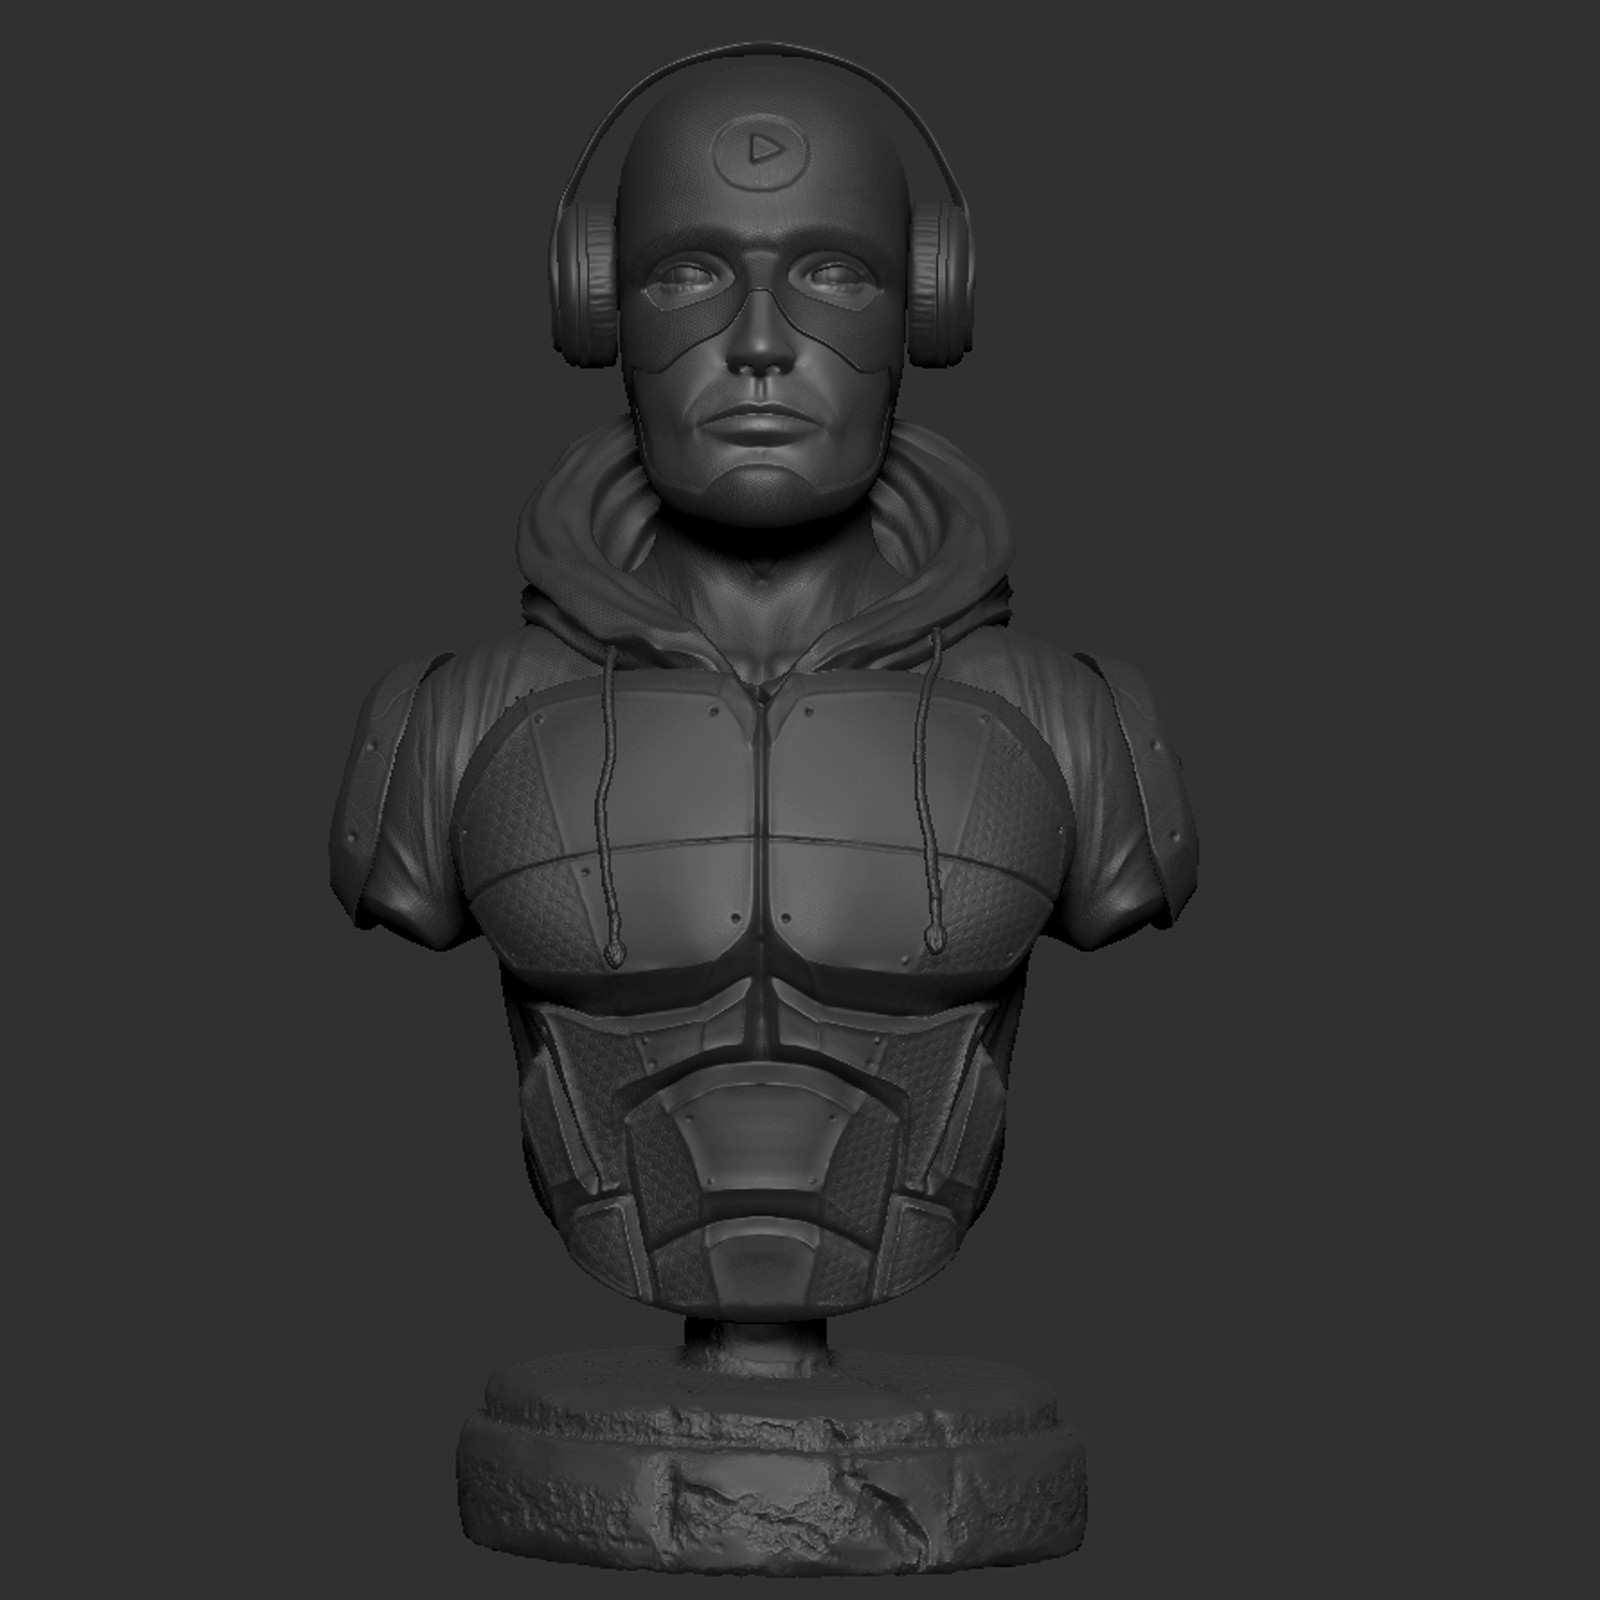 The music man. bust sculpture I made in zbrush.